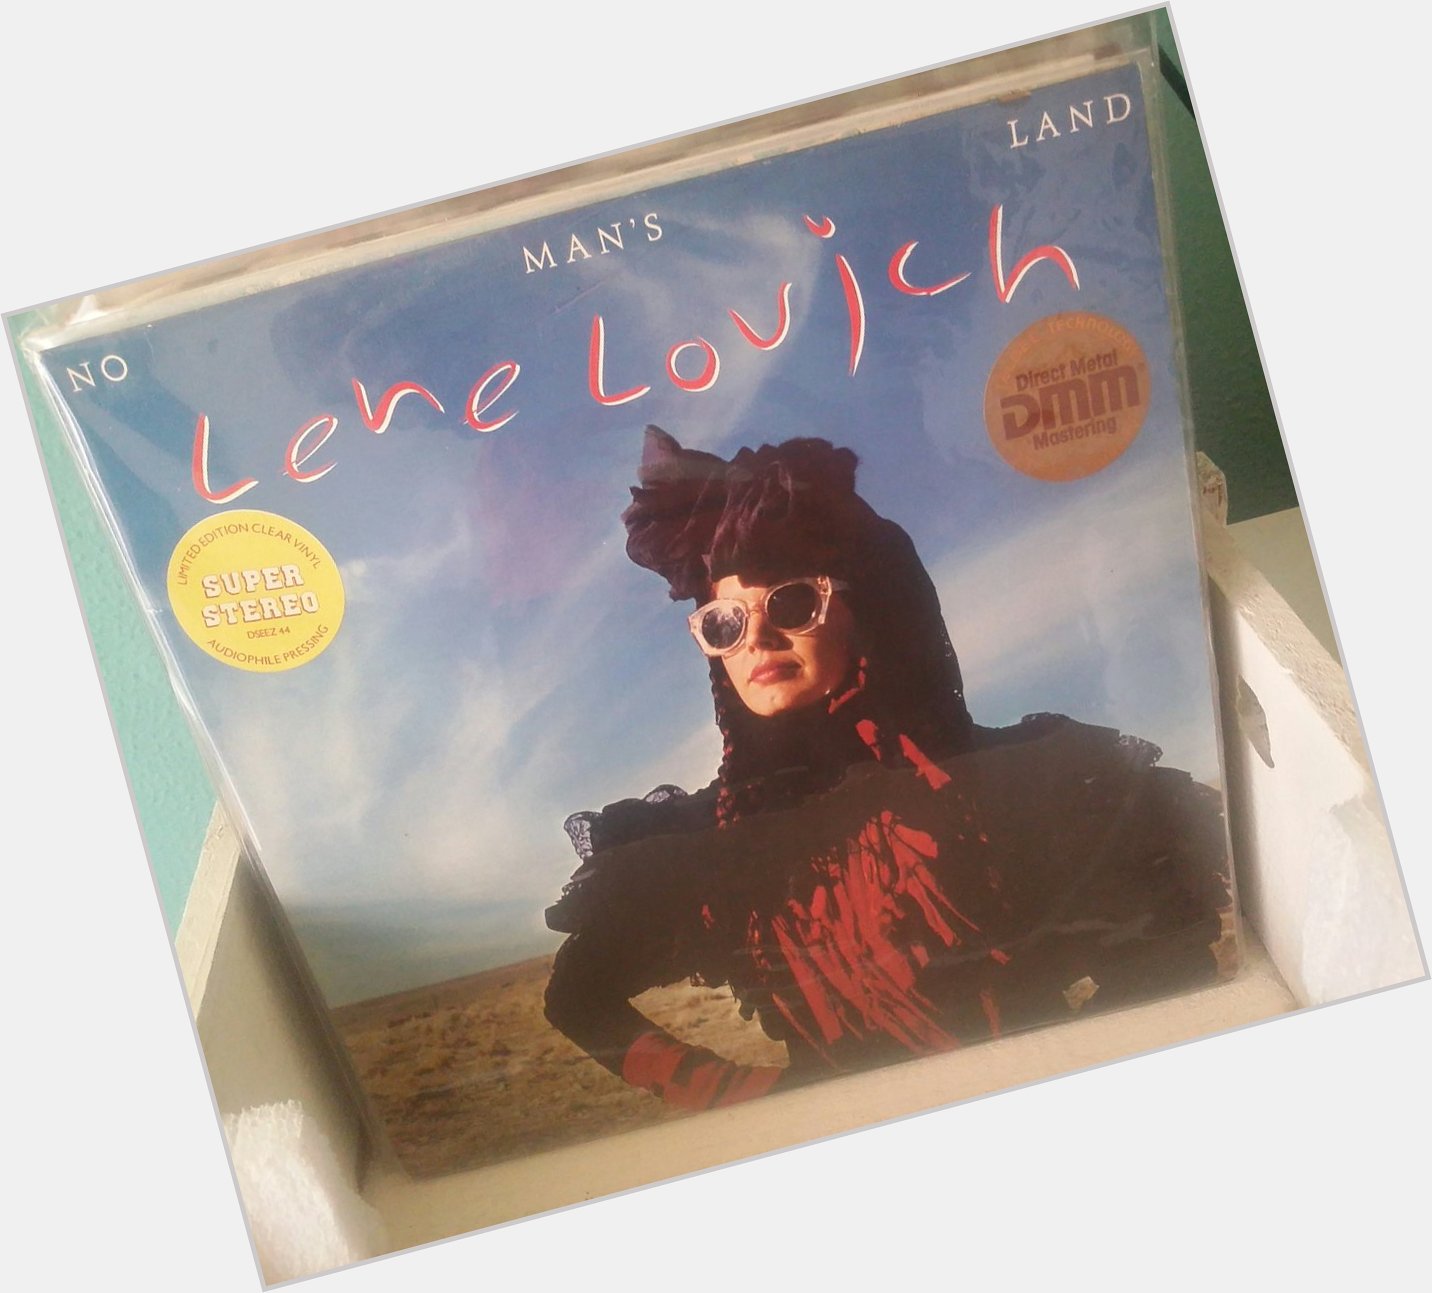 One day, i will get Stateless vinyl, thats for sure. Happy birthday Lene Lovich :)  